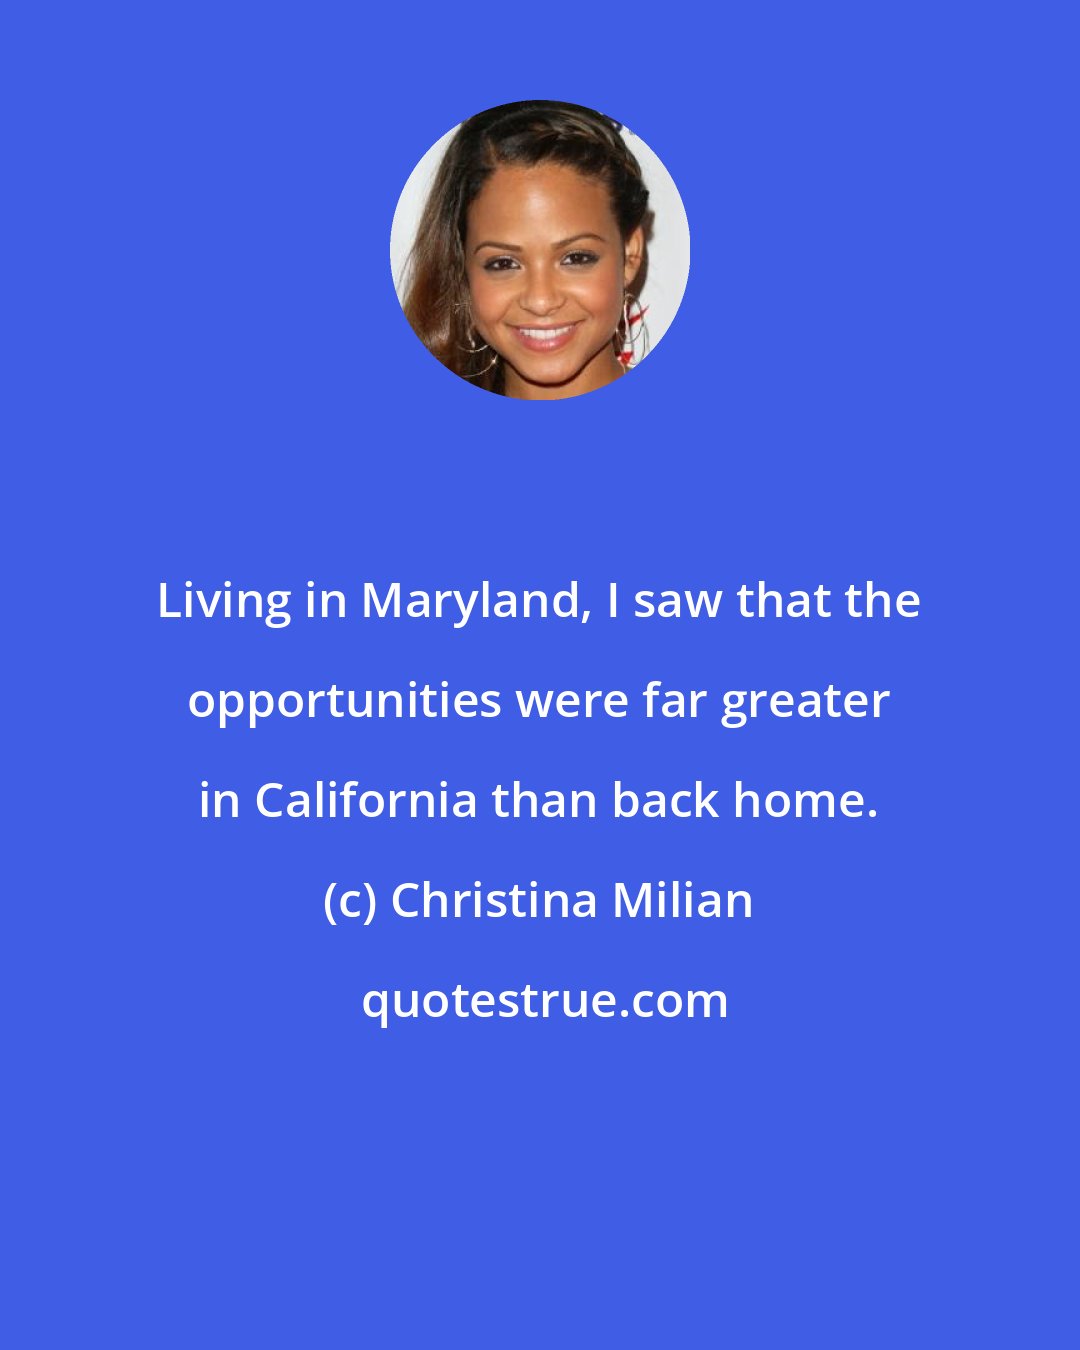 Christina Milian: Living in Maryland, I saw that the opportunities were far greater in California than back home.